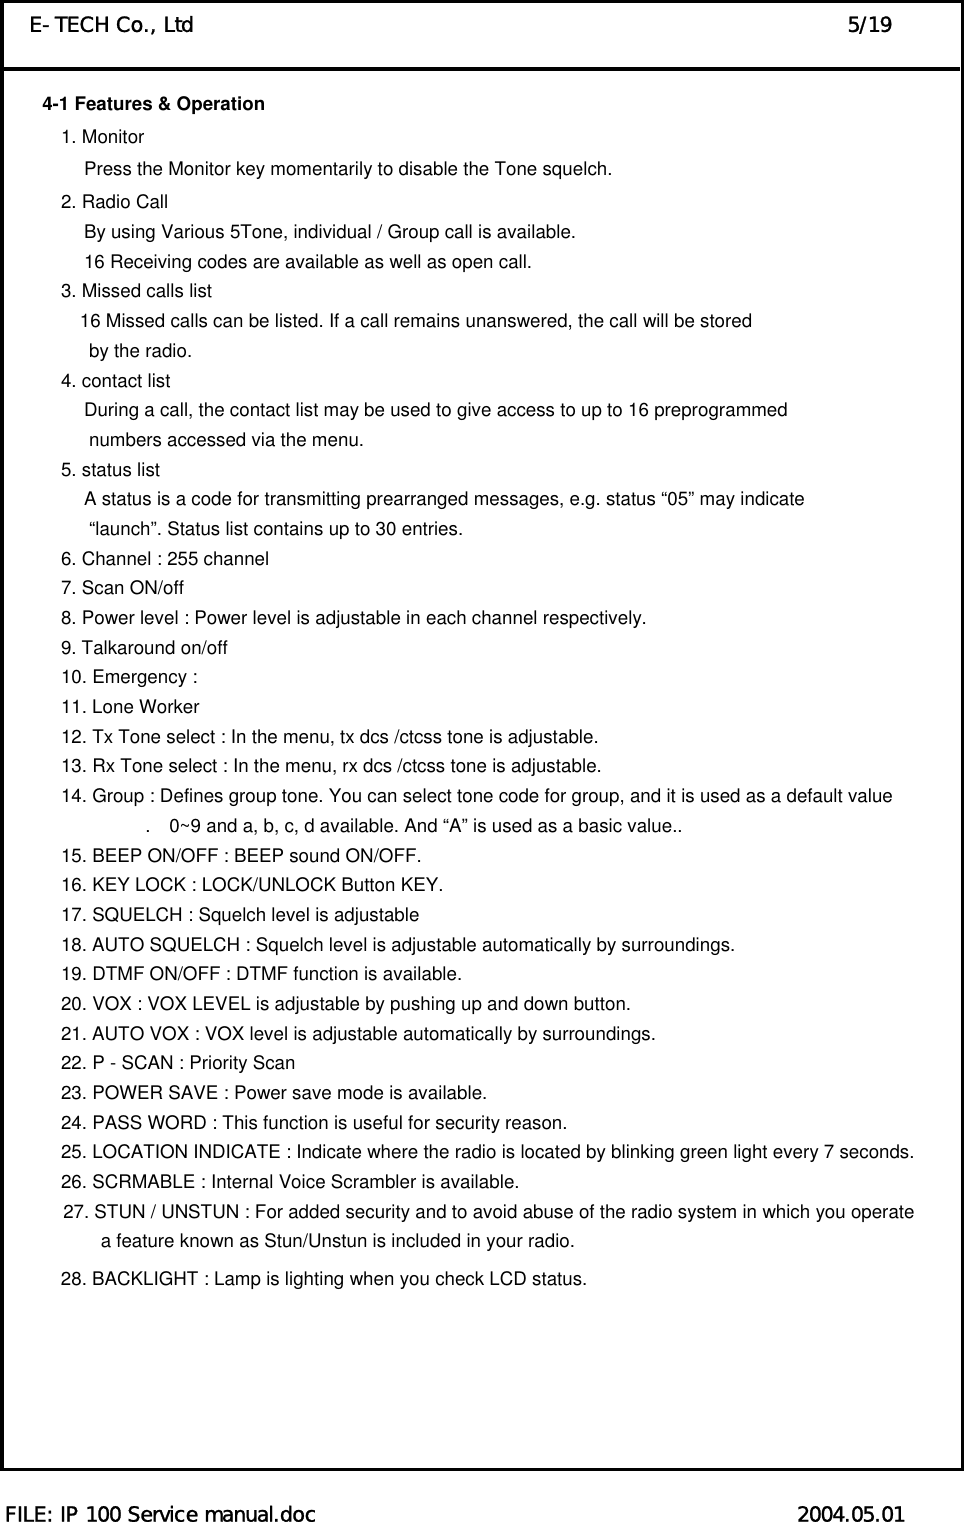  FILE: IP 100 Service manual.doc                                               2004.05.01 E-TECH Co., Ltd                                                                5/19 4-1 Features &amp; Operation         1. Monitor                  Press the Monitor key momentarily to disable the Tone squelch.   2. Radio Call                   By using Various 5Tone, individual / Group call is available.                   16 Receiving codes are available as well as open call. 3. Missed calls list                  16 Missed calls can be listed. If a call remains unanswered, the call will be stored by the radio.   4. contact list                   During a call, the contact list may be used to give access to up to 16 preprogrammed   numbers accessed via the menu.   5. status list                   A status is a code for transmitting prearranged messages, e.g. status “05” may indicate “launch”. Status list contains up to 30 entries. 6. Channel : 255 channel   7. Scan ON/off   8. Power level : Power level is adjustable in each channel respectively.   9. Talkaround on/off   10. Emergency :   11. Lone Worker   12. Tx Tone select : In the menu, tx dcs /ctcss tone is adjustable.   13. Rx Tone select : In the menu, rx dcs /ctcss tone is adjustable.   14. Group : Defines group tone. You can select tone code for group, and it is used as a default value .    0~9 and a, b, c, d available. And “A” is used as a basic value..   15. BEEP ON/OFF : BEEP sound ON/OFF.     16. KEY LOCK : LOCK/UNLOCK Button KEY.   17. SQUELCH : Squelch level is adjustable   18. AUTO SQUELCH : Squelch level is adjustable automatically by surroundings.   19. DTMF ON/OFF : DTMF function is available.   20. VOX : VOX LEVEL is adjustable by pushing up and down button.   21. AUTO VOX : VOX level is adjustable automatically by surroundings.   22. P - SCAN : Priority Scan   23. POWER SAVE : Power save mode is available.   24. PASS WORD : This function is useful for security reason.   25. LOCATION INDICATE : Indicate where the radio is located by blinking green light every 7 seconds.   26. SCRMABLE : Internal Voice Scrambler is available.   27. STUN / UNSTUN : For added security and to avoid abuse of the radio system in which you operate     a feature known as Stun/Unstun is included in your radio. 28. BACKLIGHT : Lamp is lighting when you check LCD status.          